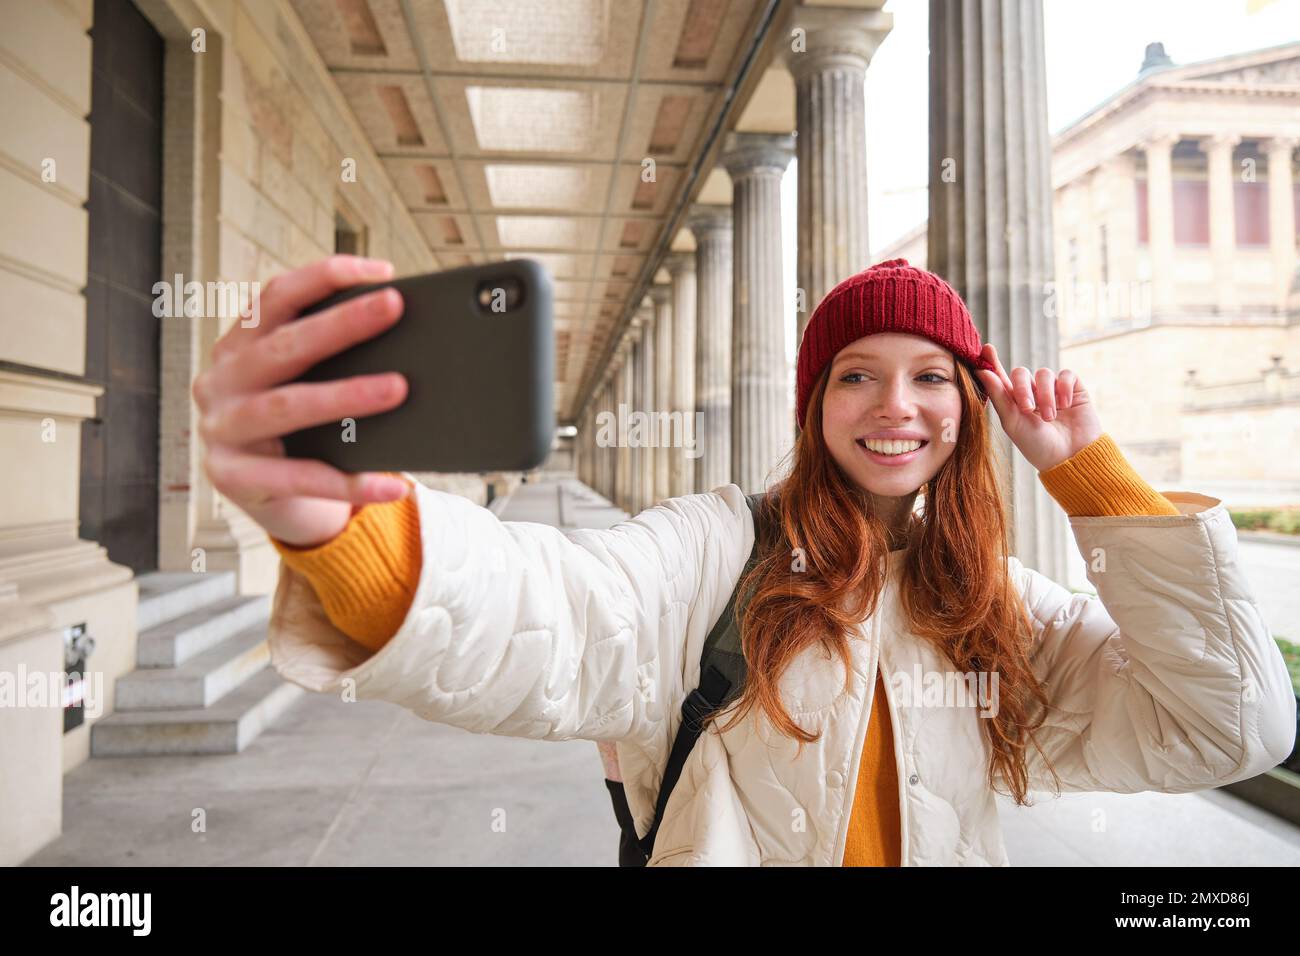 Cute young redhead woman takes selfie on street with mobile phone, makes a photo of herself with smartphone app on street. Stock Photo